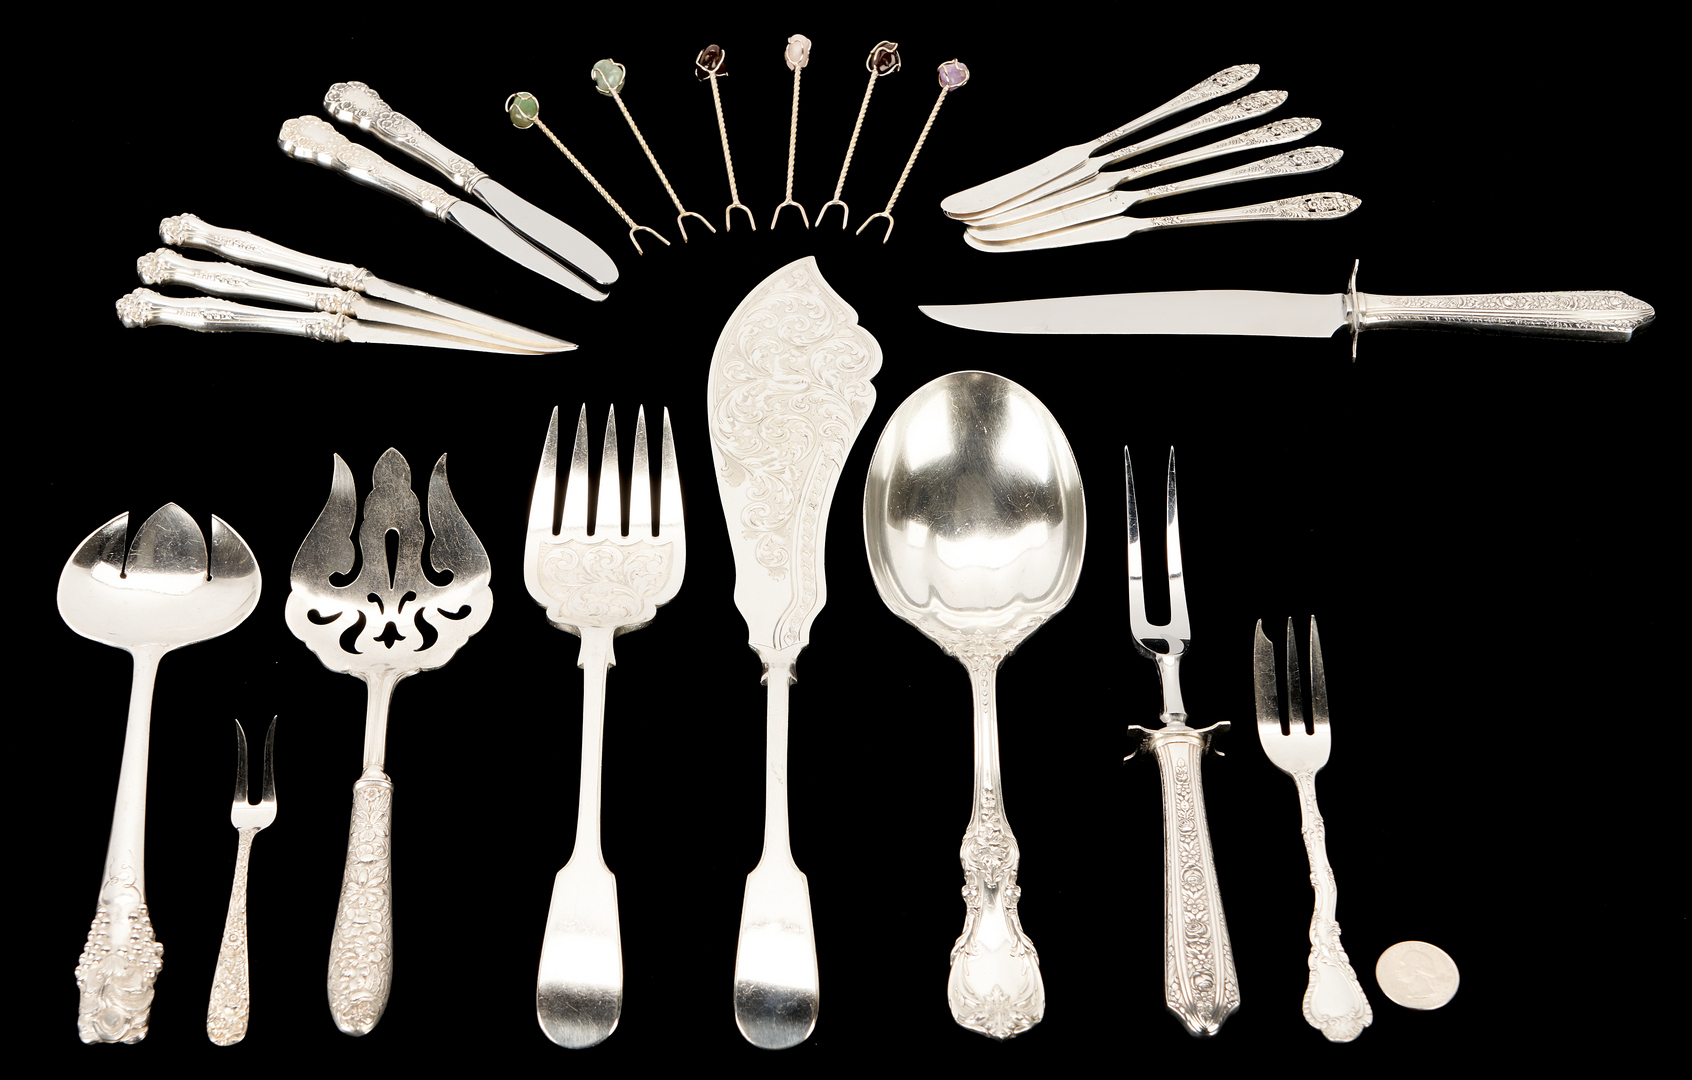 Lot 1154: 25 pcs. Miscellaneous Silver & Silverplated Flatware incl. Serving